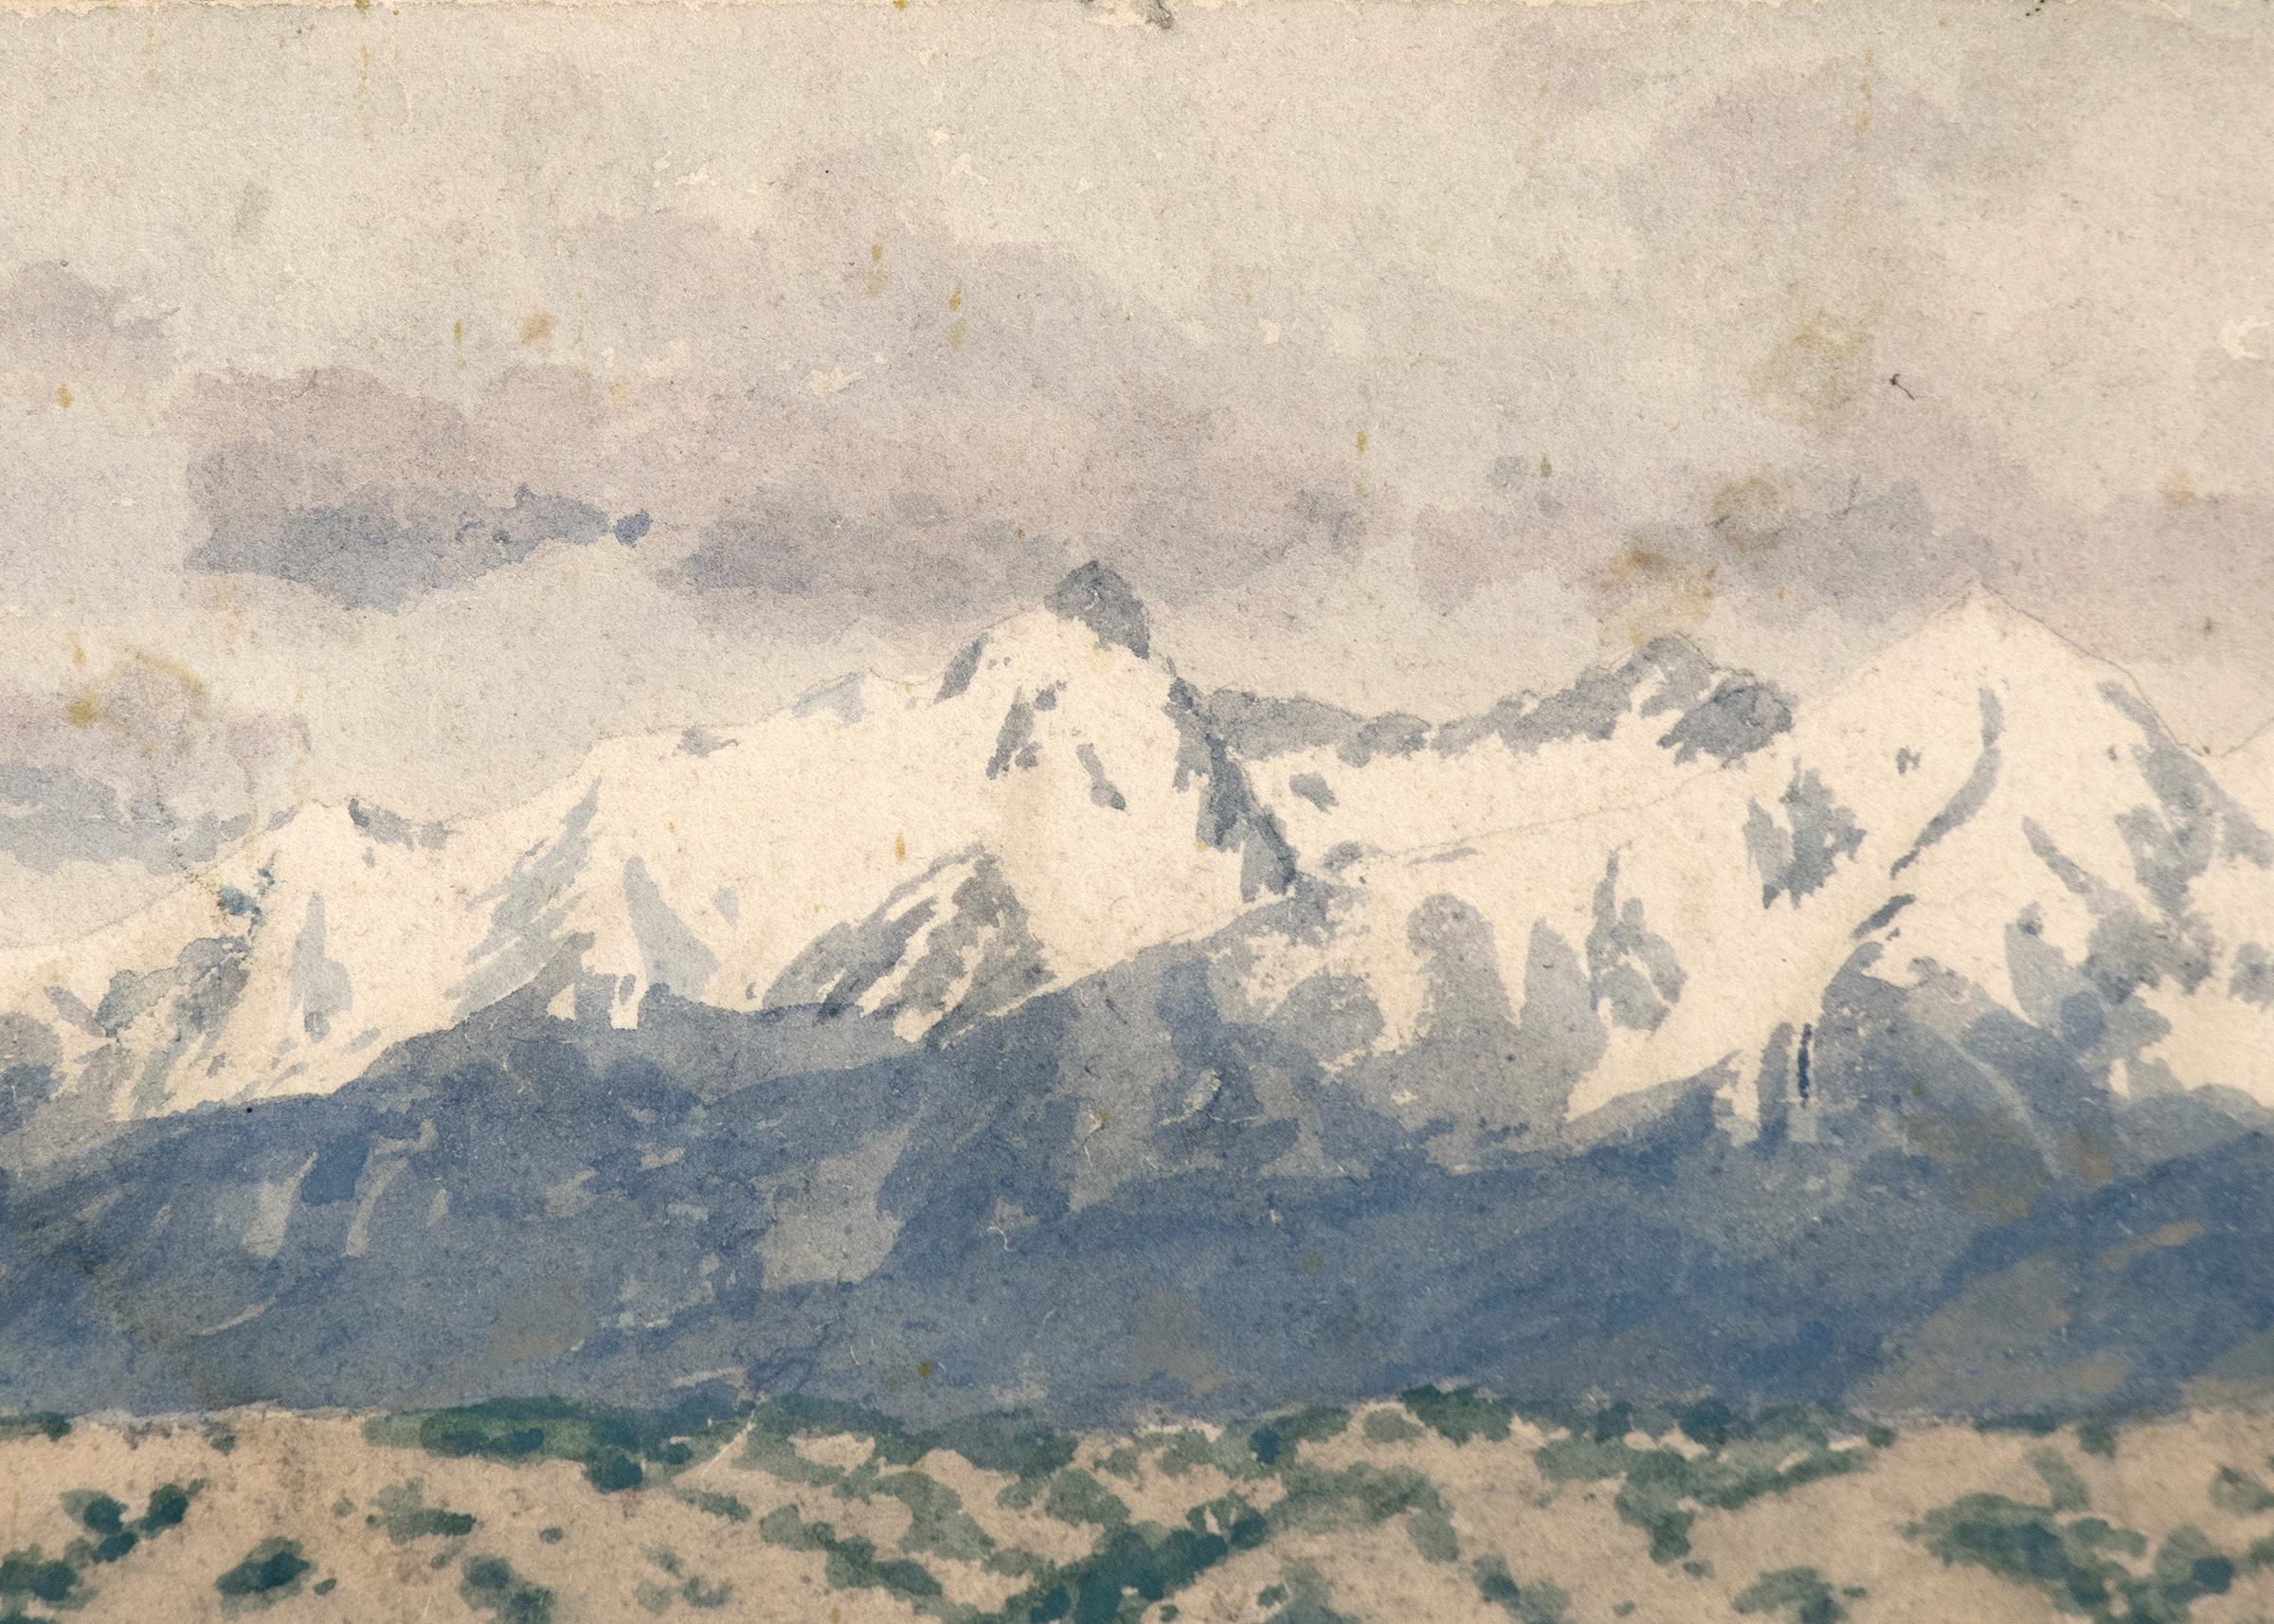 Blanca Peak, Sangre de Cristo Range, from the San Luis Valley, Colorado mountain landscape painting, vintage circa 1915 by Charles Partridge Adams (1858-1942).  Painted with watercolor on paper in colors of green, blue, beige, tan, brown, white and